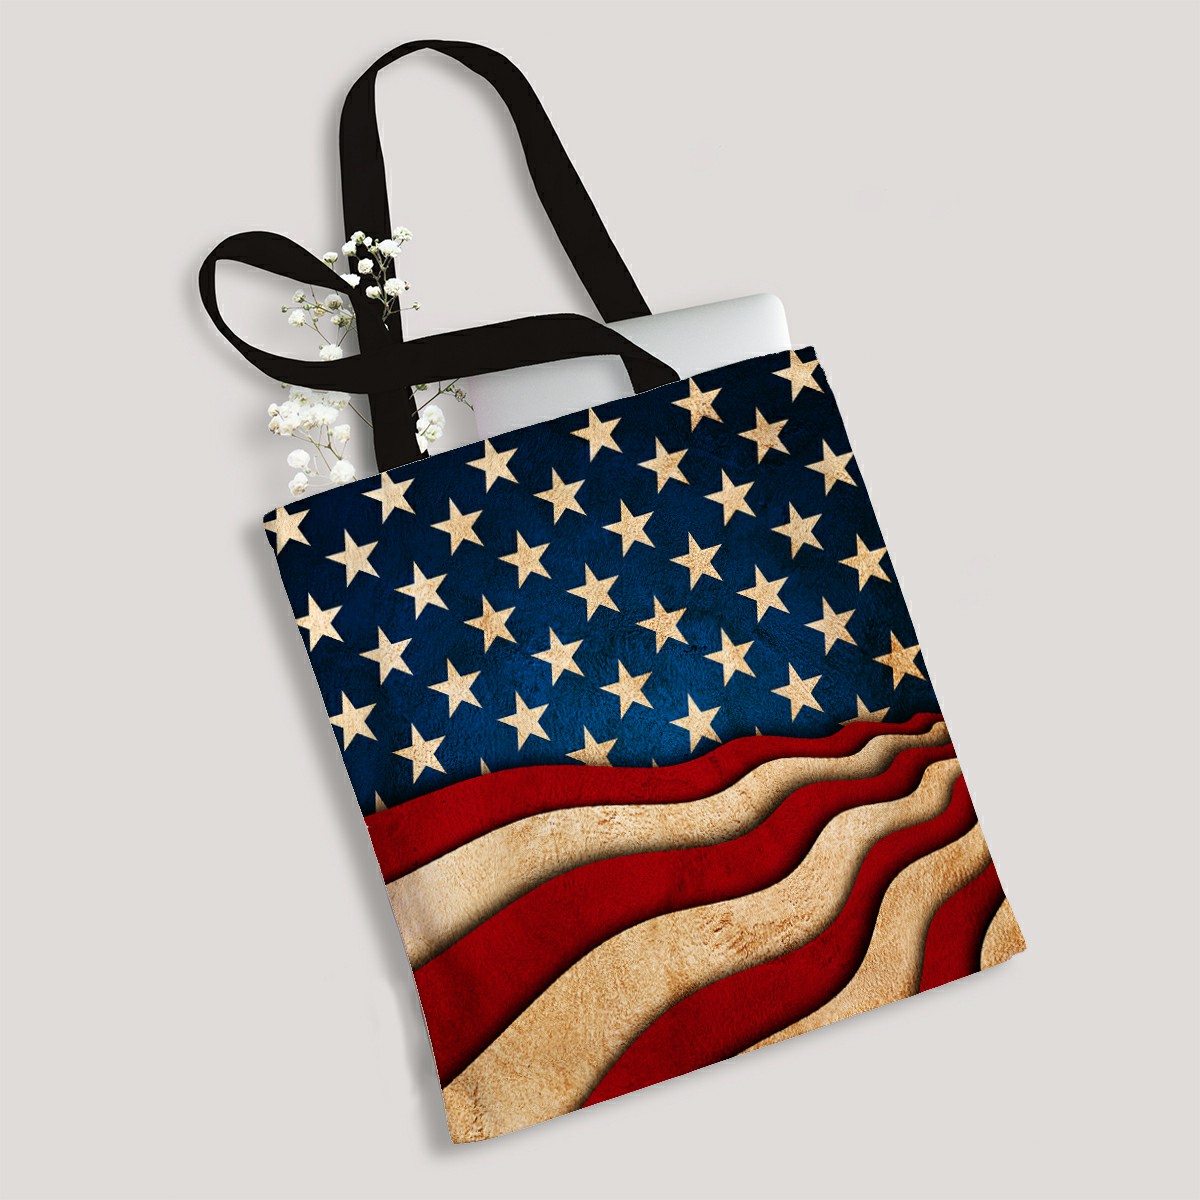 ECZJNT 4th of July Independence Day America USA Canvas Bag Reusable Tote Grocery Shopping Bags Tote Bag 14"(W) x 16"(H) - image 1 of 1